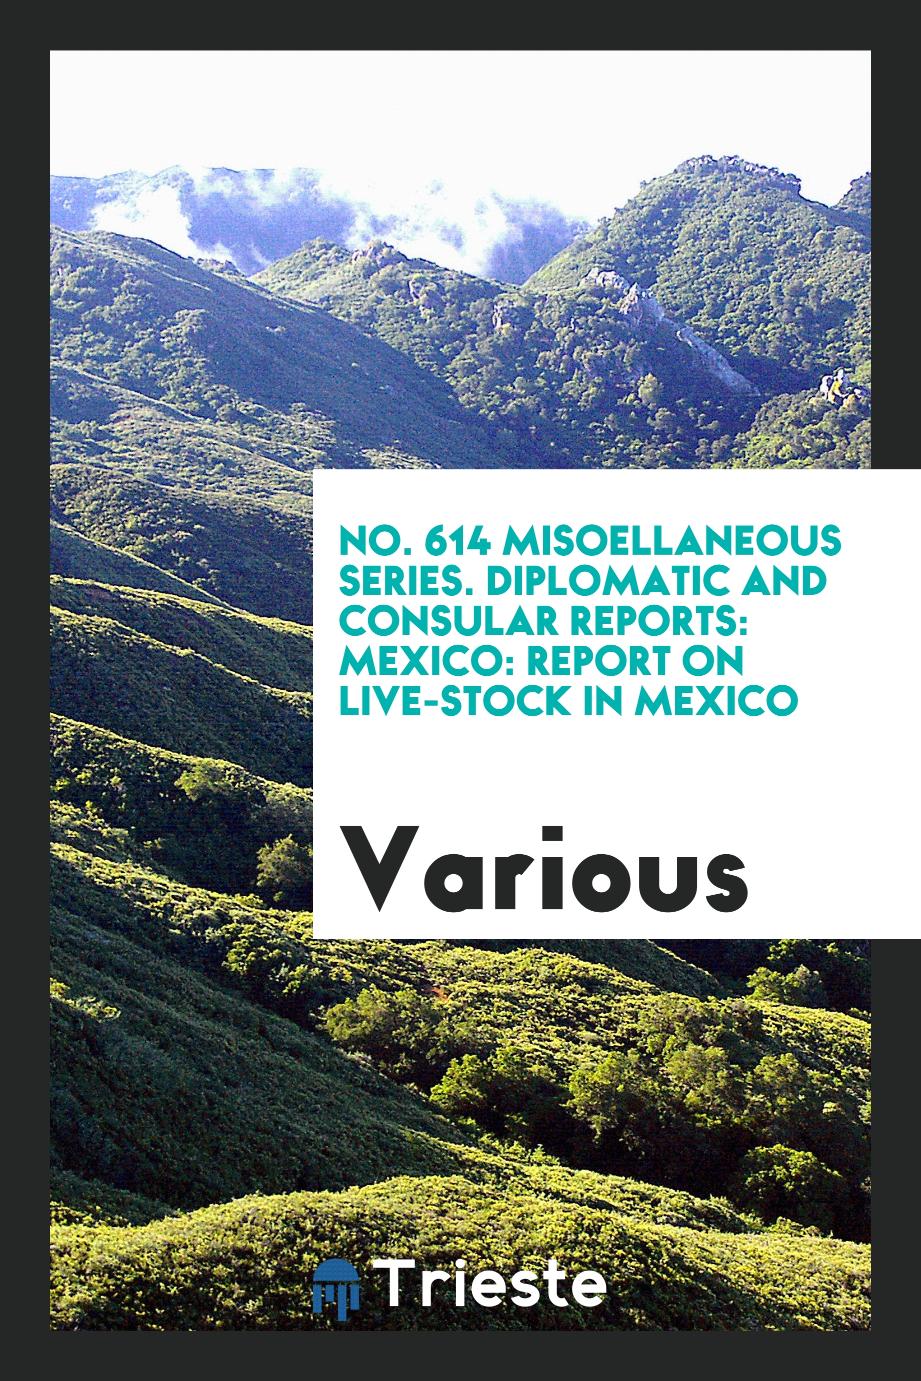 No. 614 Misoellaneous series. Diplomatic and consular reports: Mexico: Report on Live-stock in Mexico